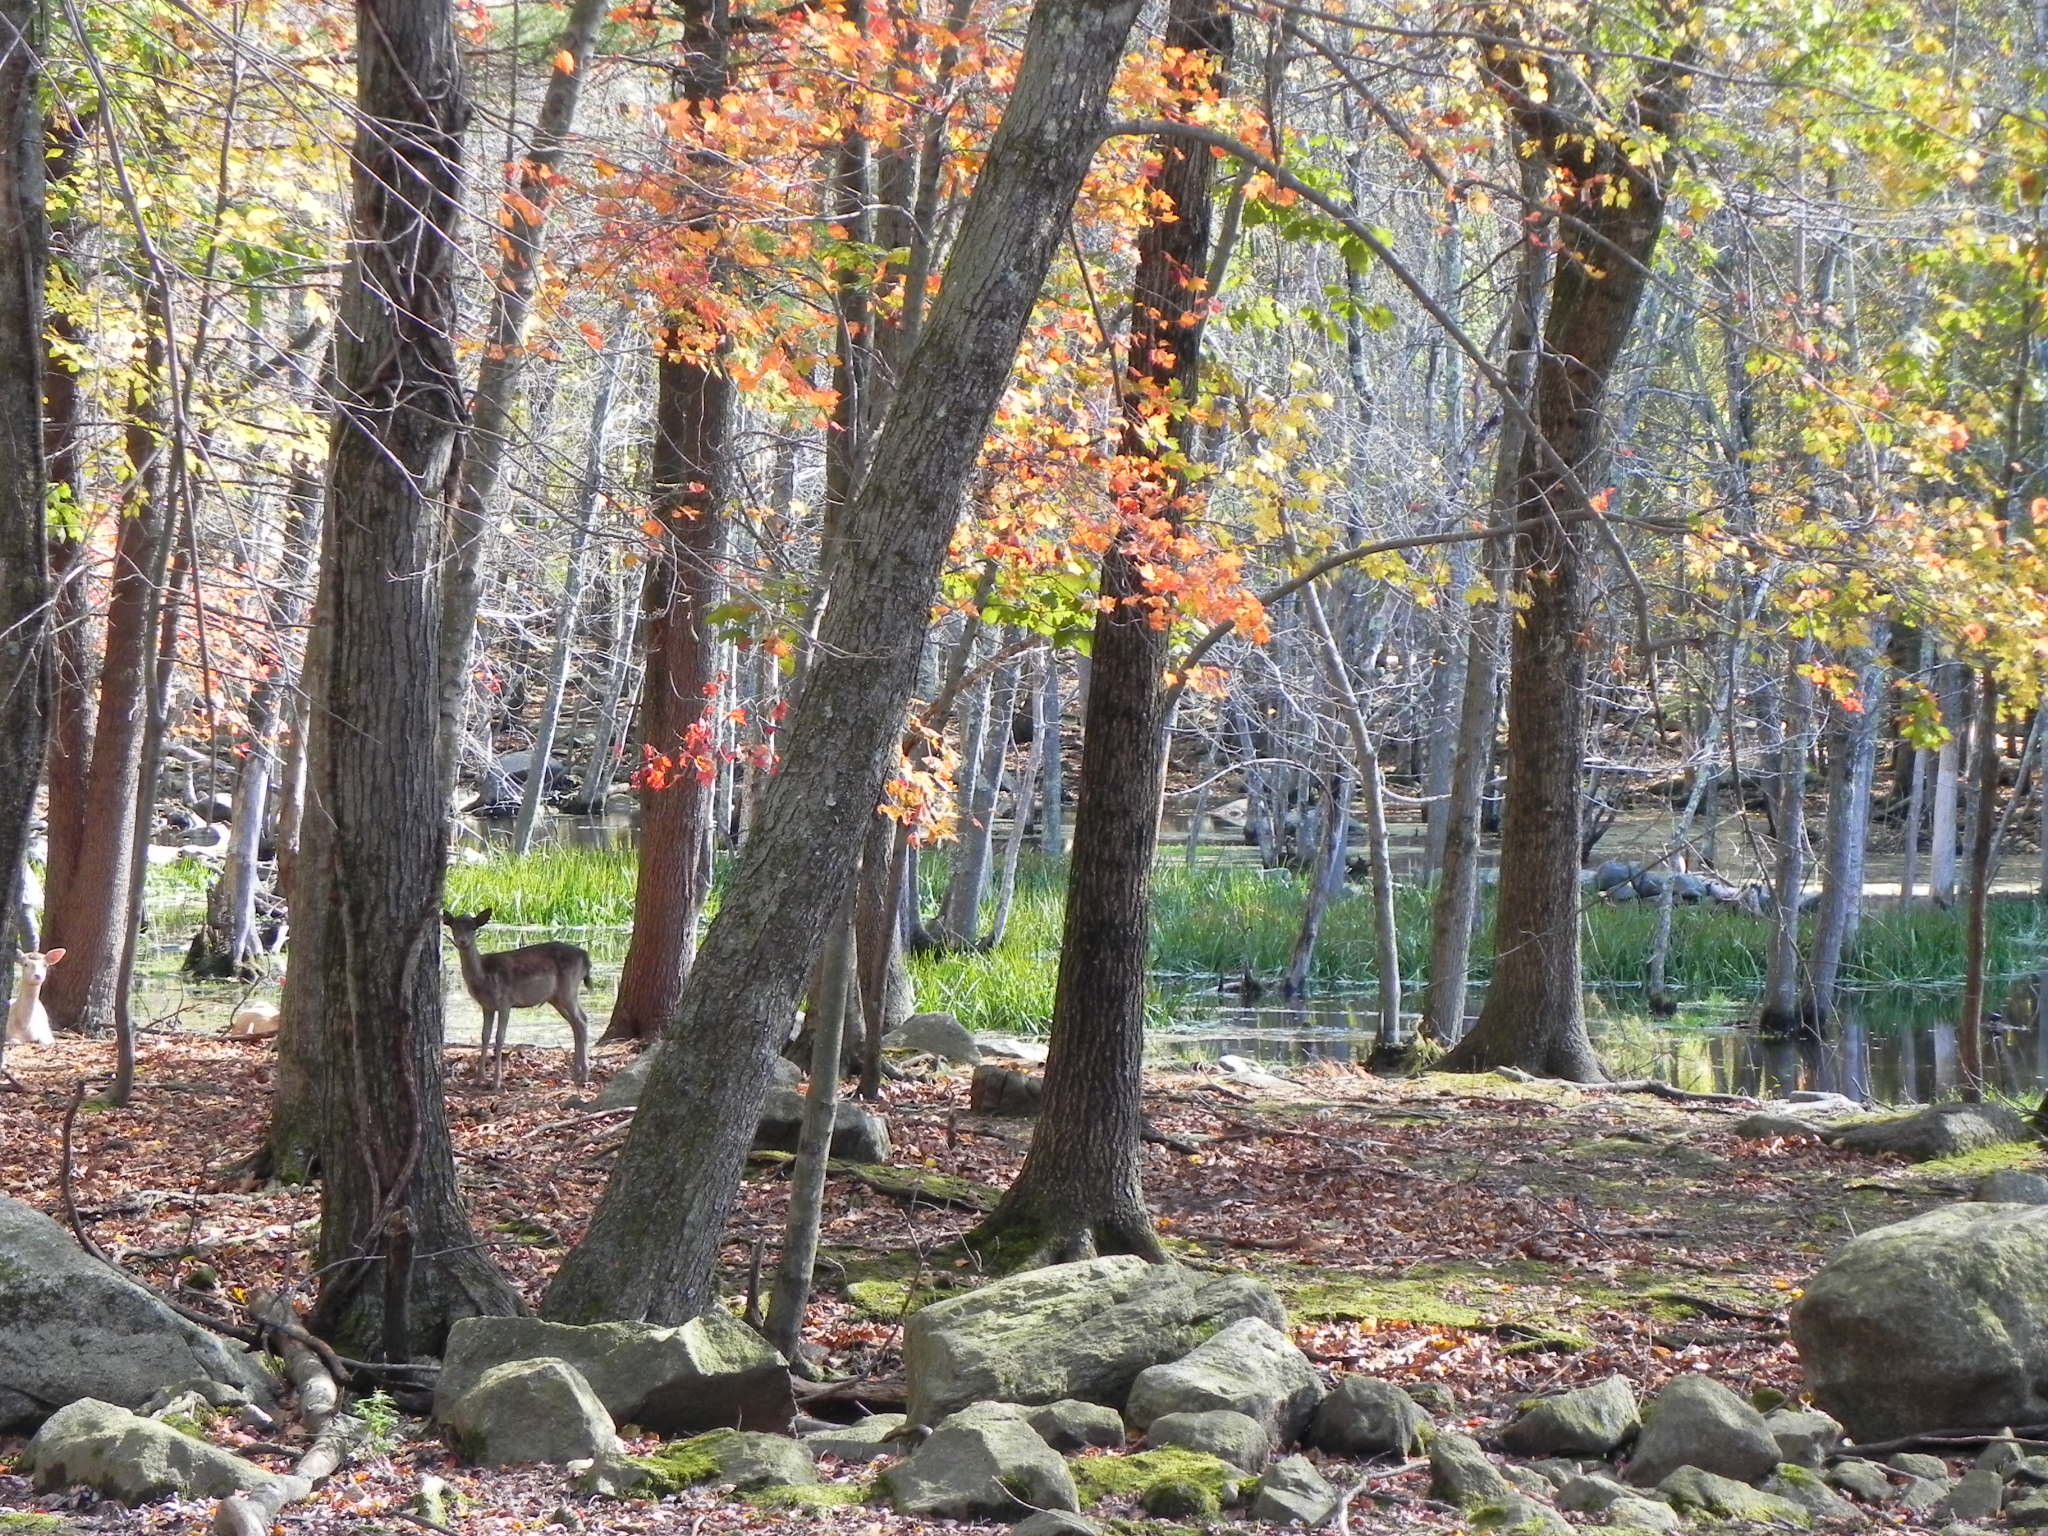 Deer In Foliage. (user submitted)